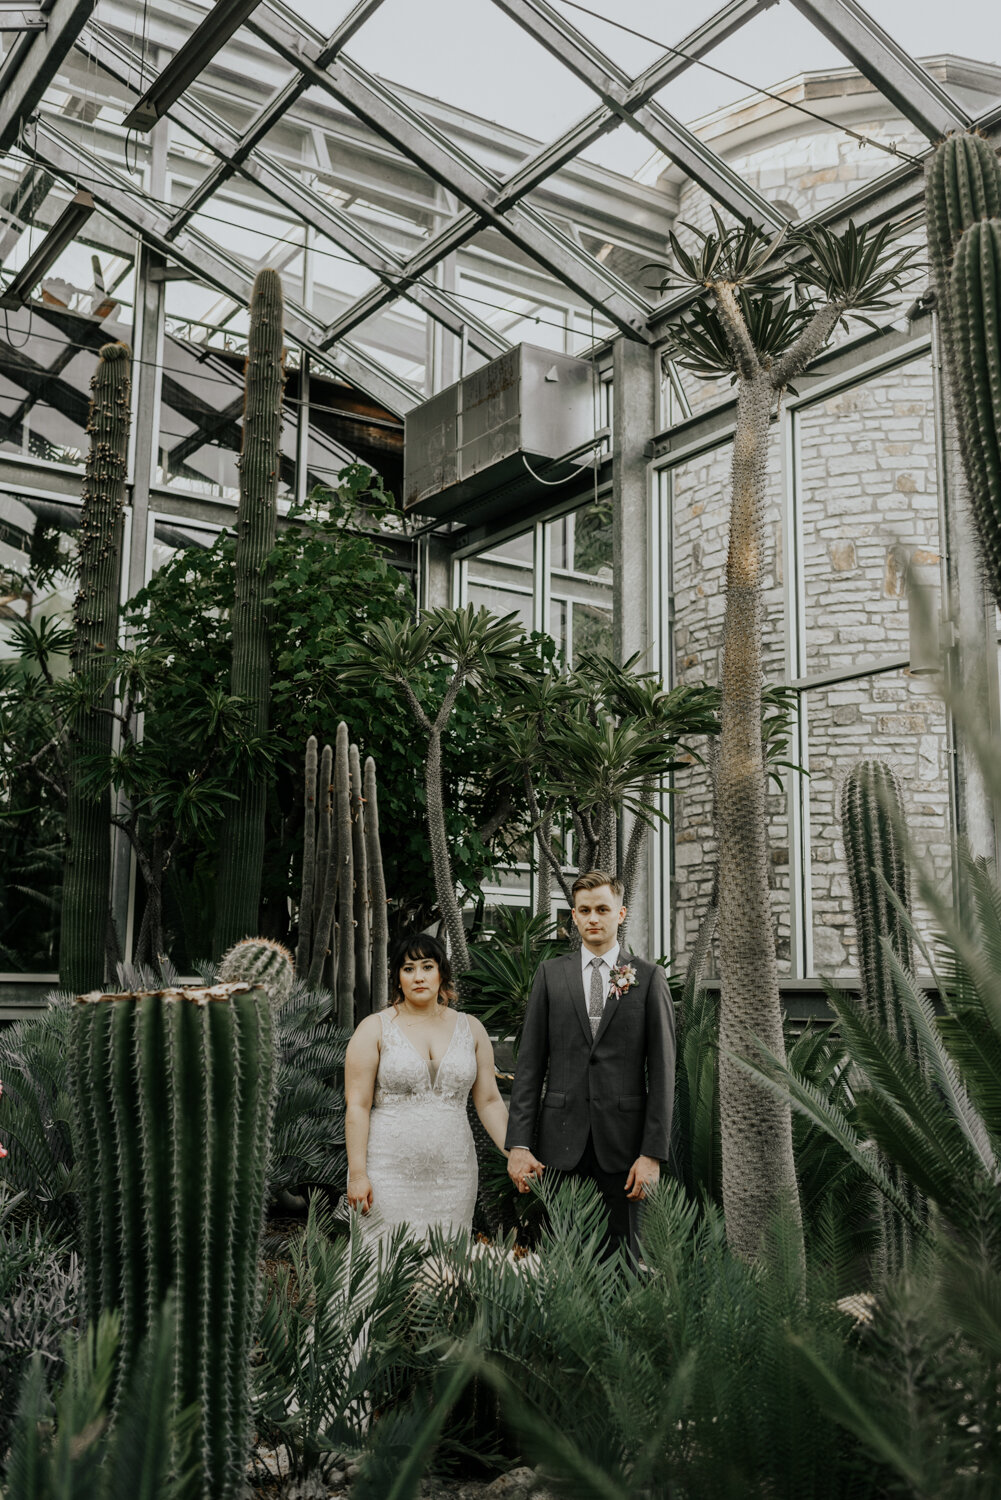 Modern Bride and Groom Wedding Portraits at the Greenhouse in Driftwood Austin, Texas